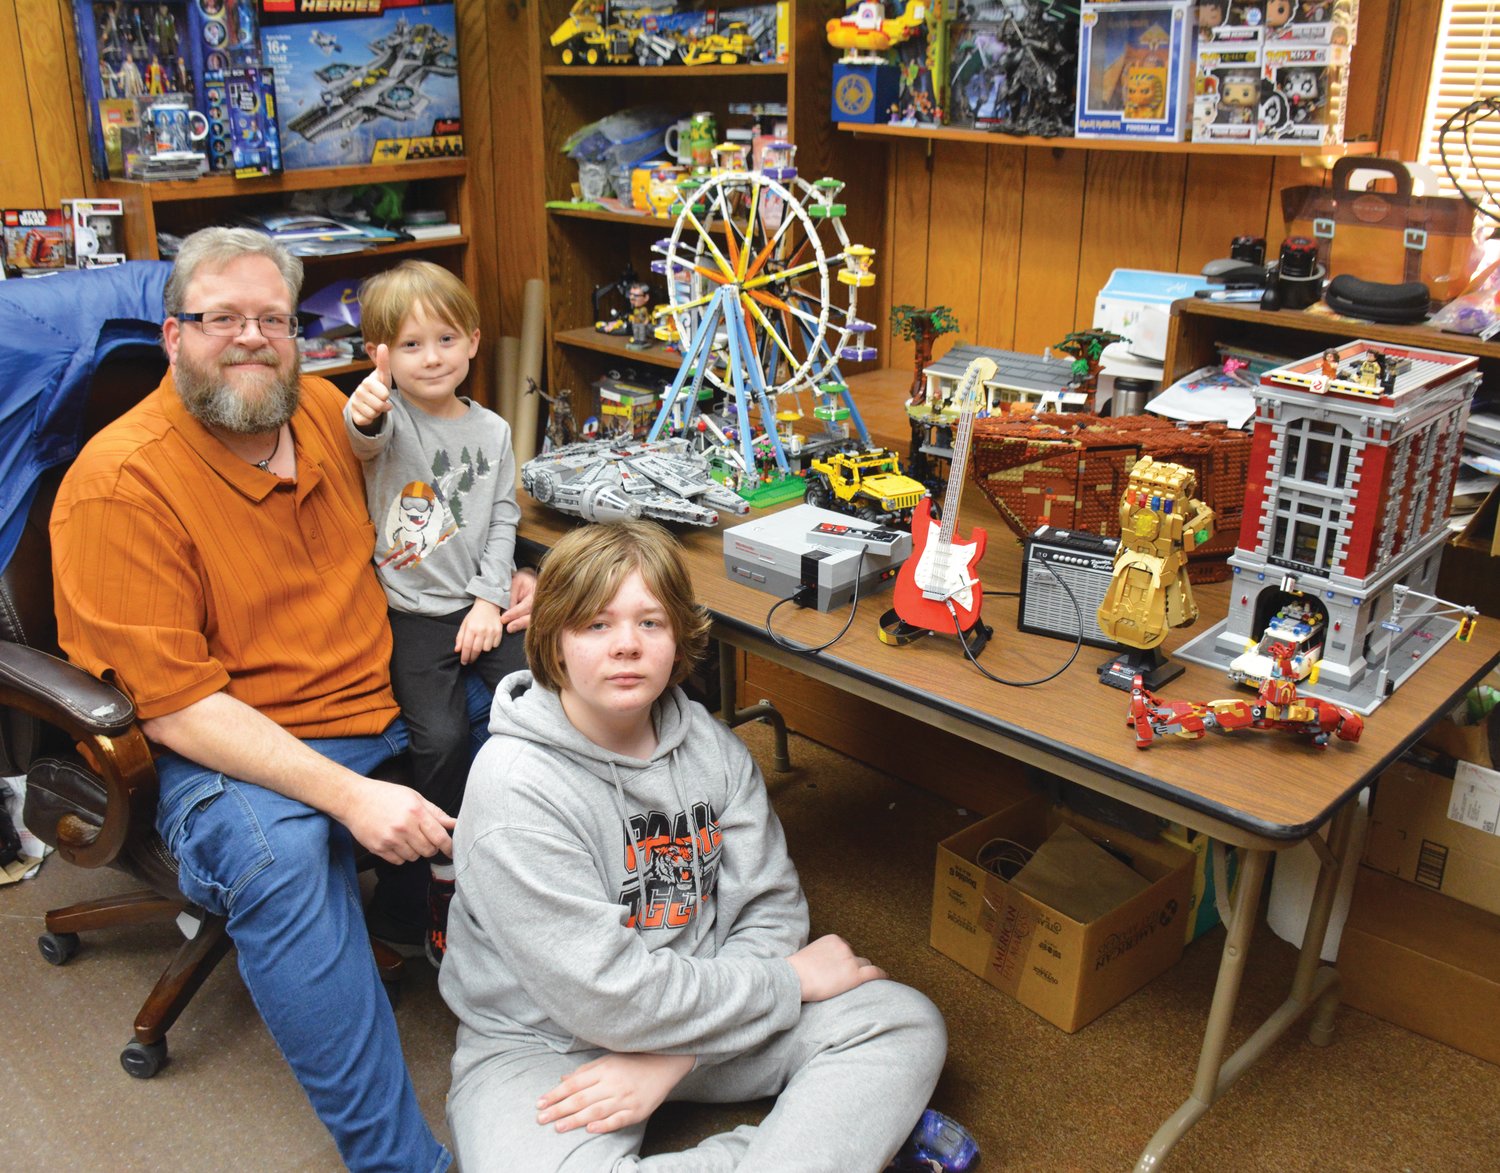 From left to right, Scott Blair, Emric Blair and Gareth Blair pose next to an assortment of LEGO builds. Building with LEGOs is beneficial for building relationships and developing spatial awareness.